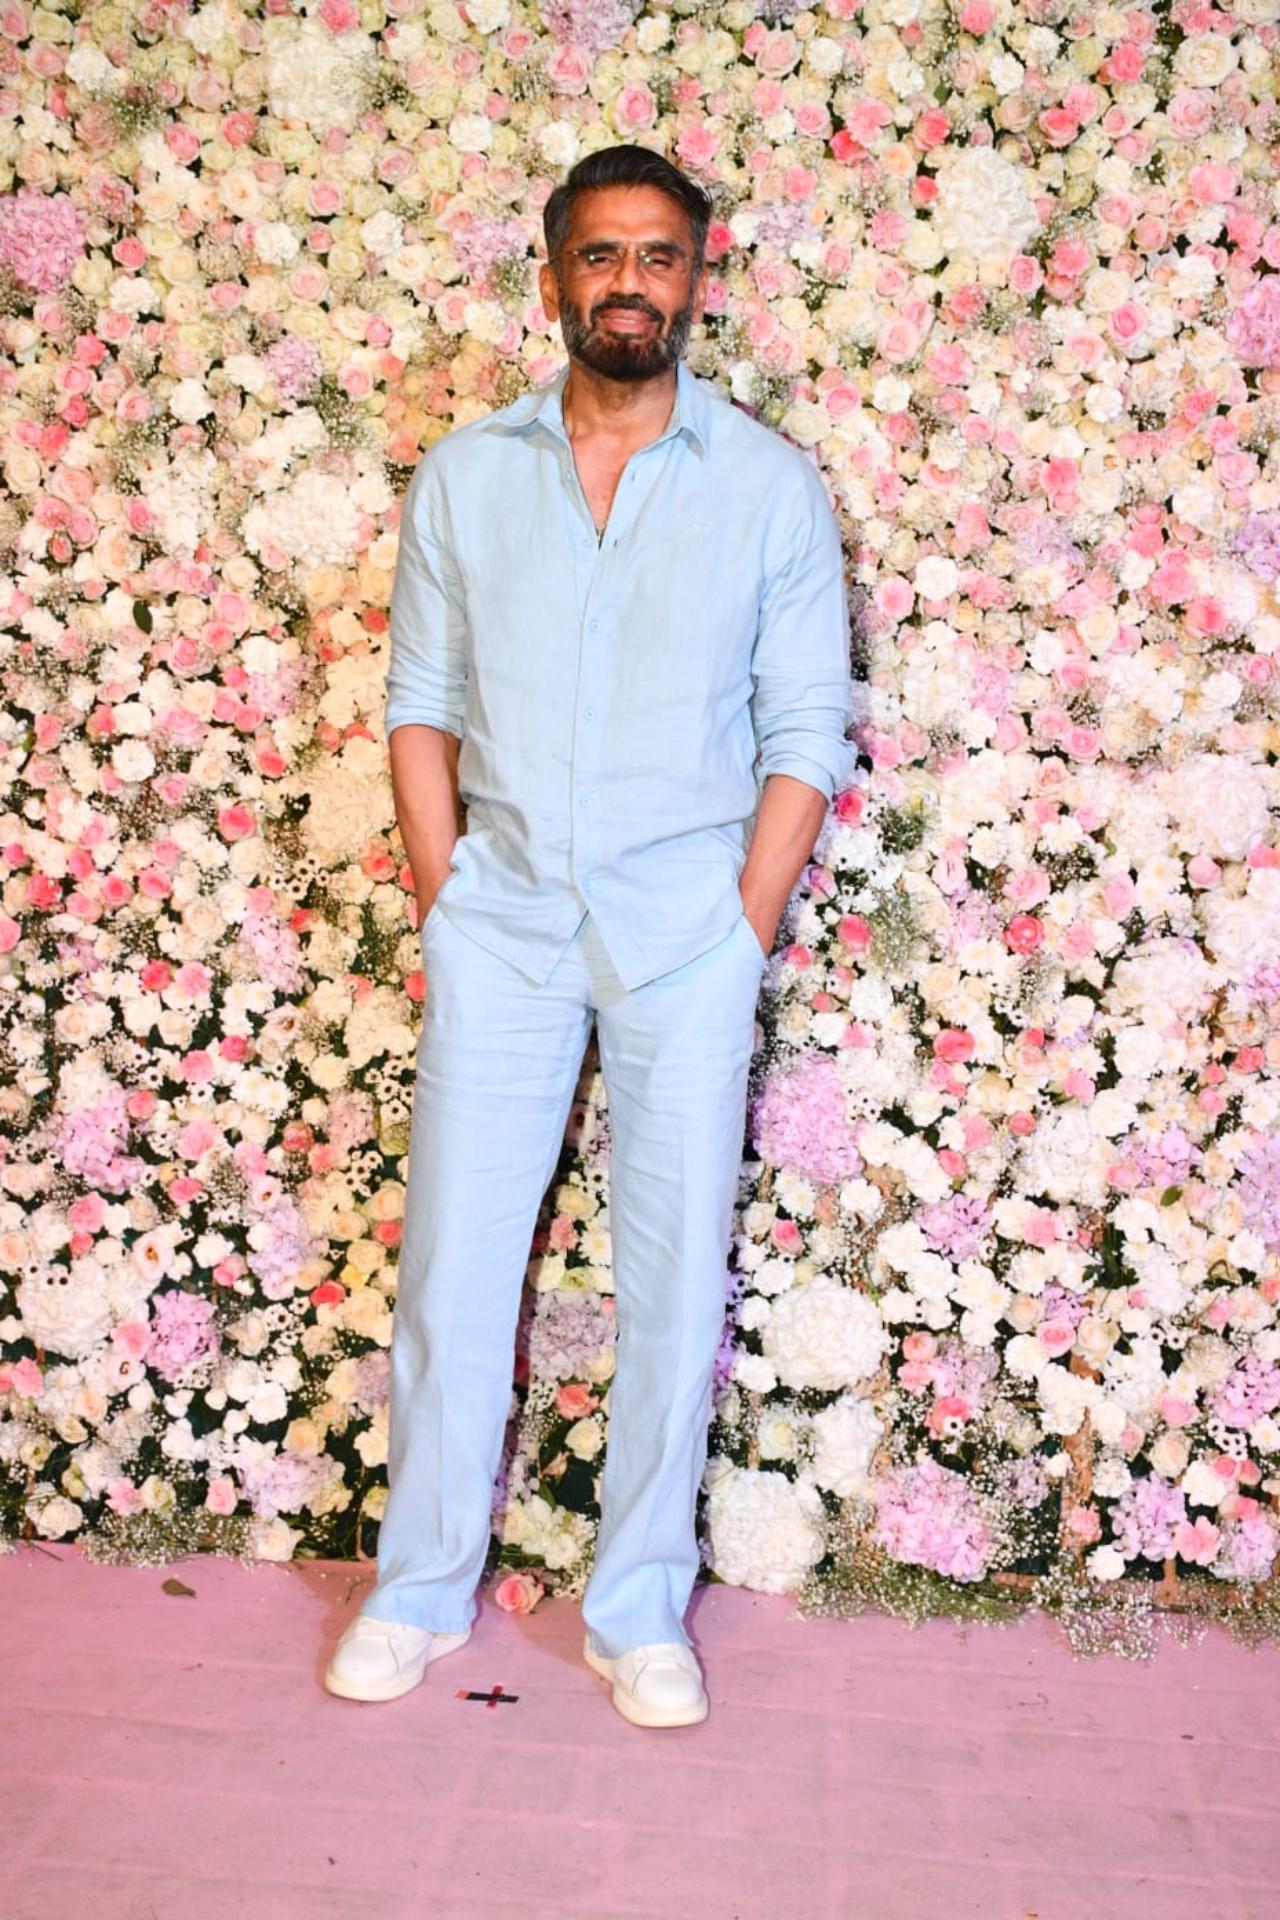 Suniel Shetty looked super cool and stylish in a sky blue shirt and matching pants